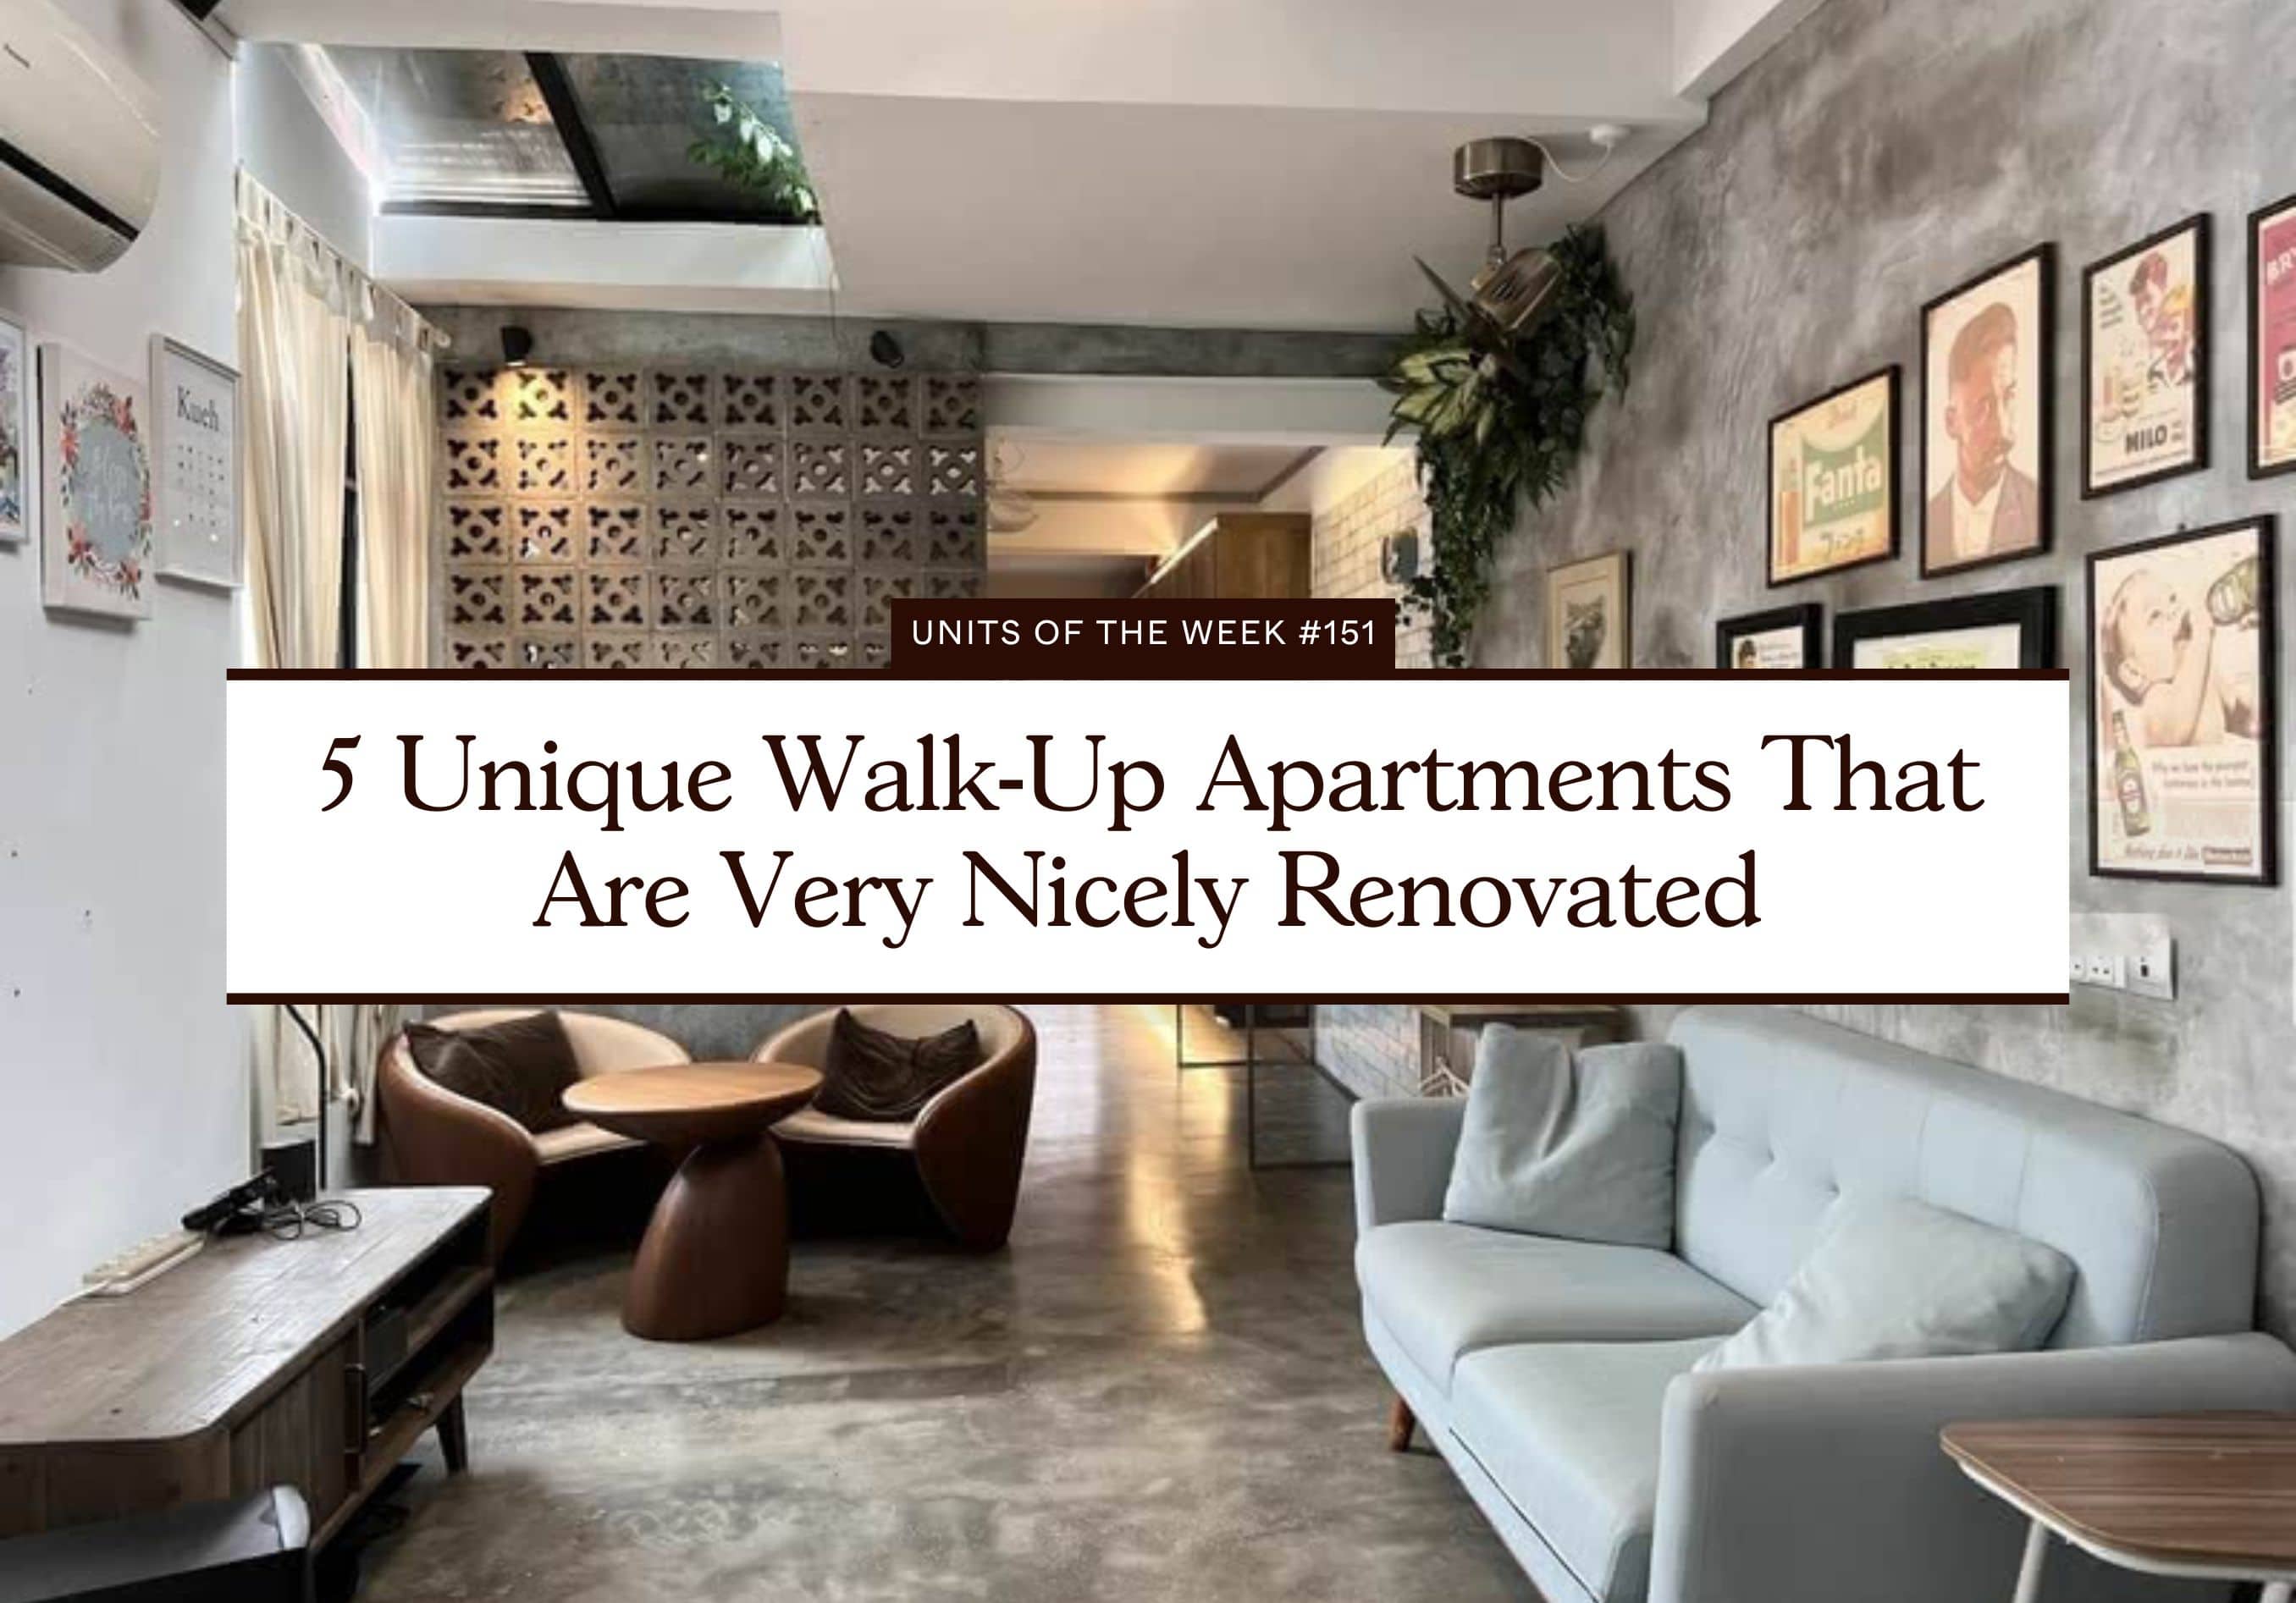 5 Unique Walk-Up Apartments That Are Very Nicely Renovated